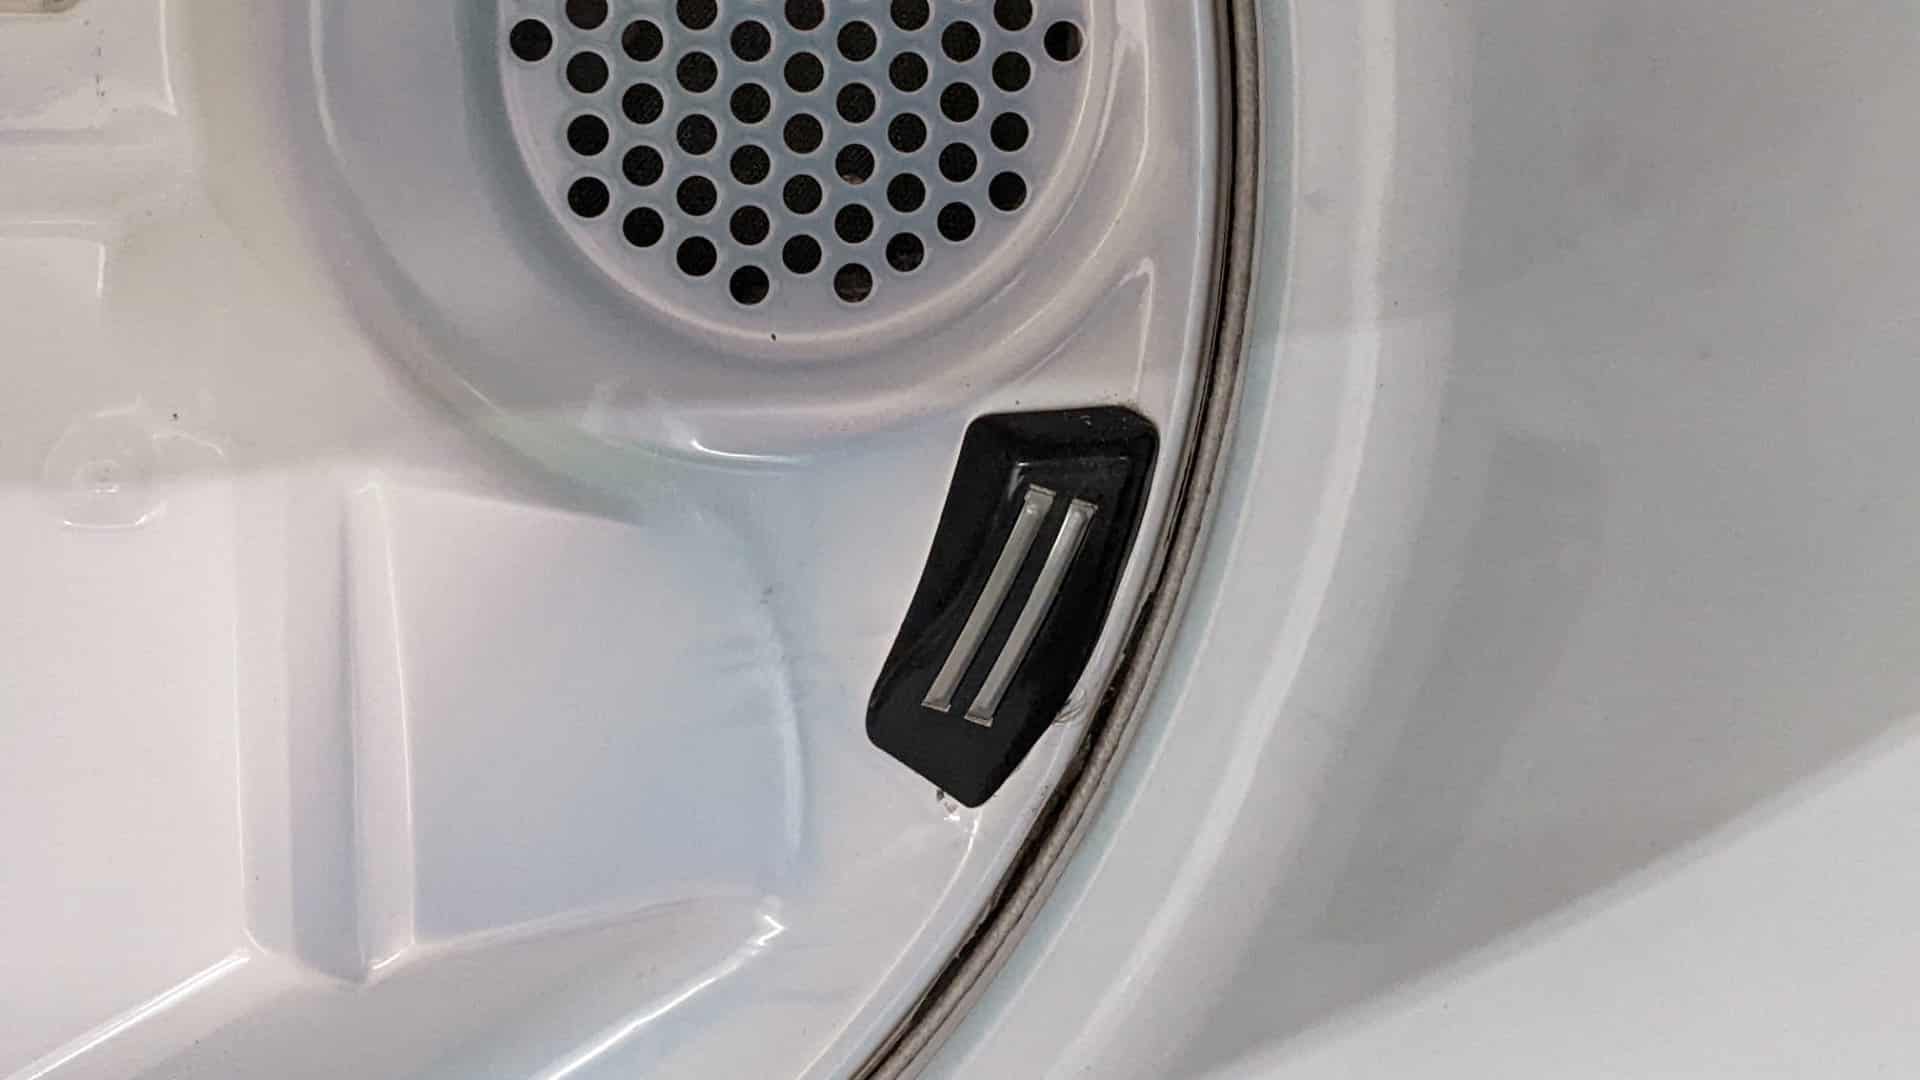 Maytag Centennial Dryer Not Heating Up  : Troubleshooting Tips and Fixes